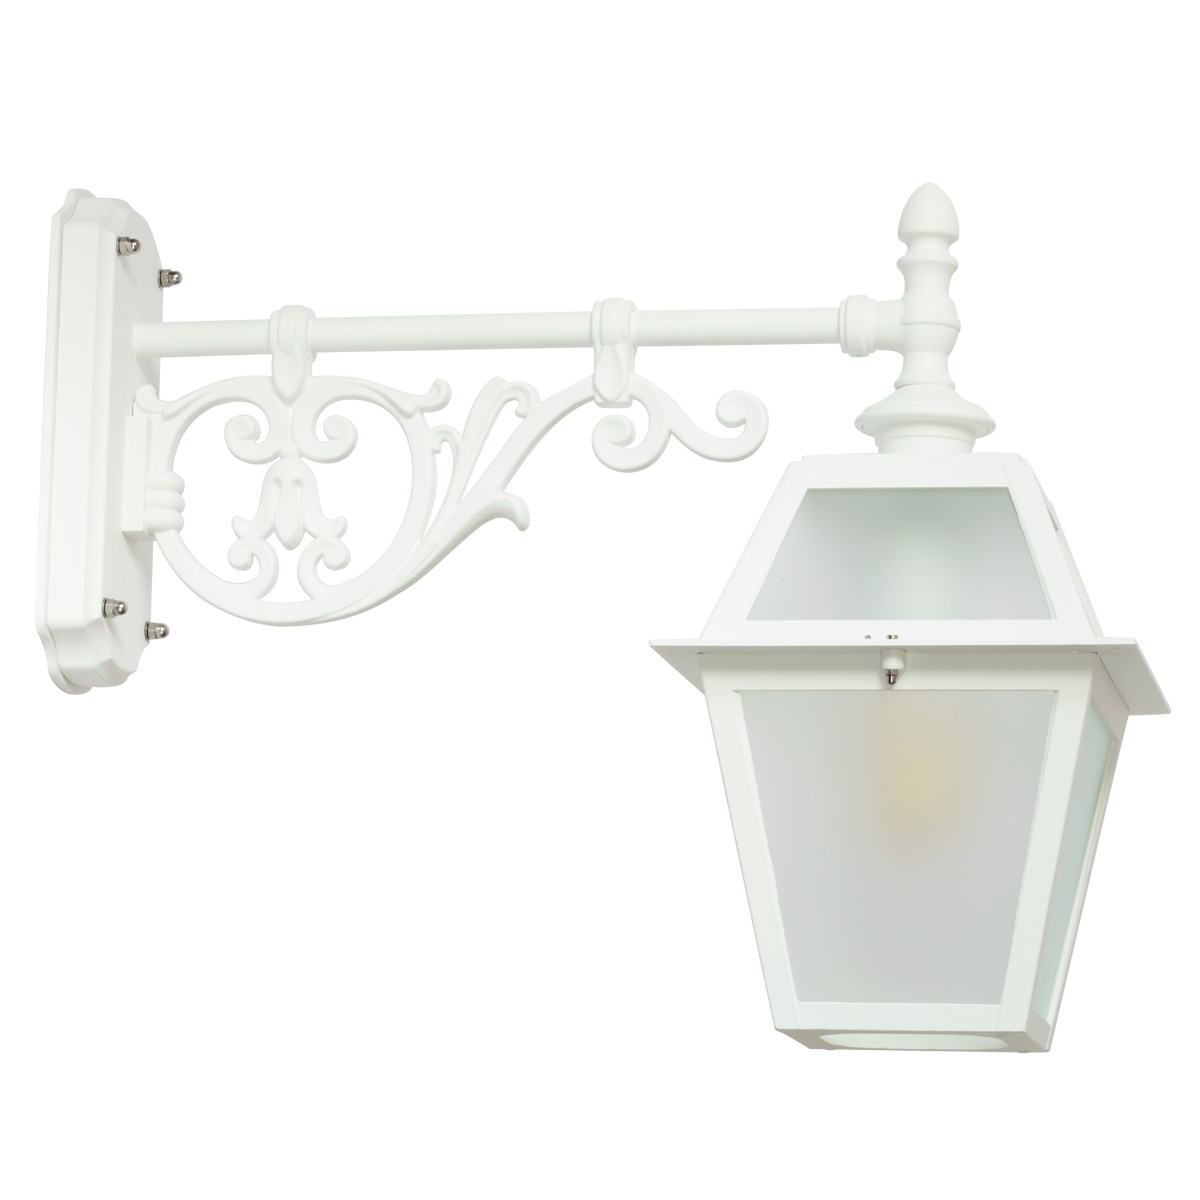 Wall Light for Outdoor Use with Ornate Bracket